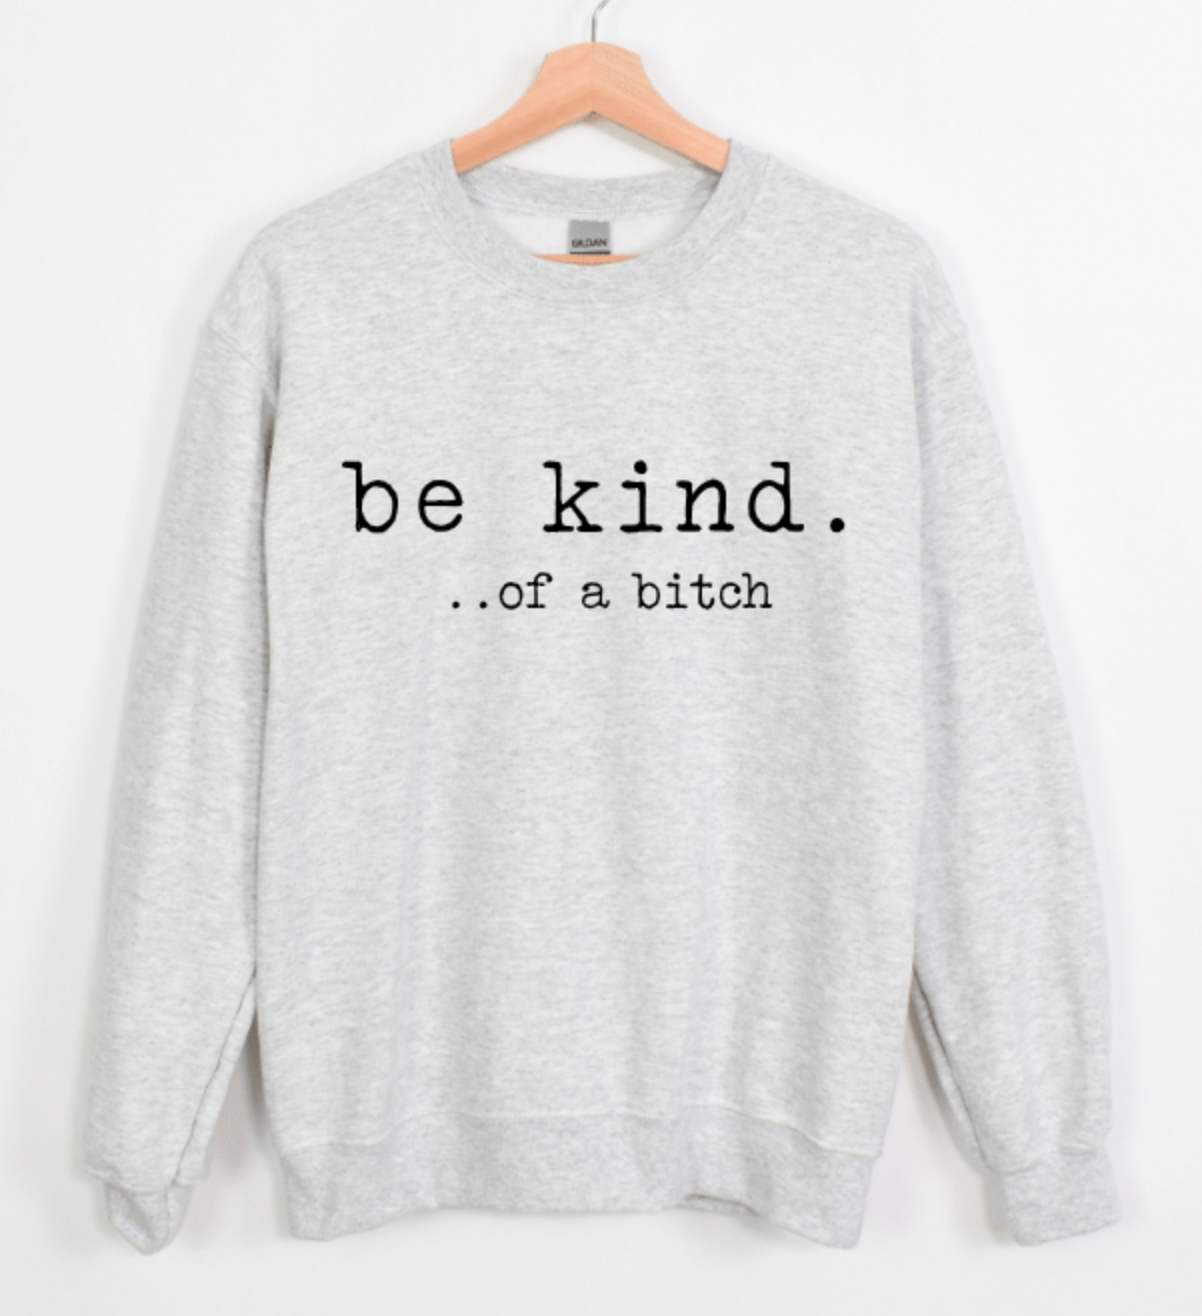 Be Kind...of a bitch